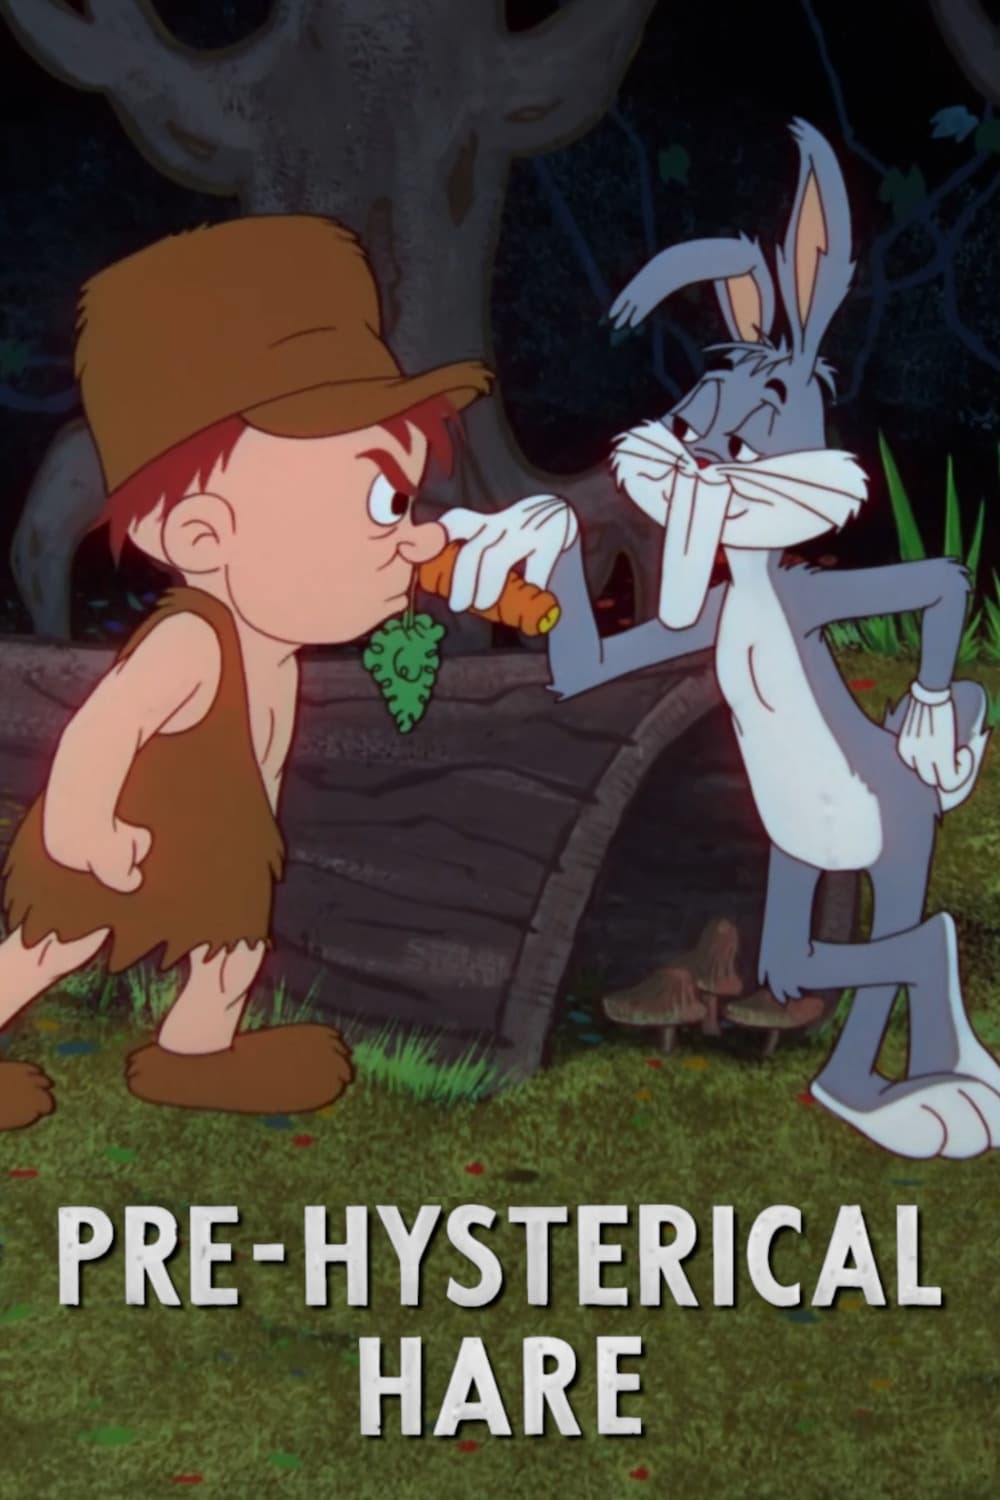 Pre-Hysterical Hare (1958)